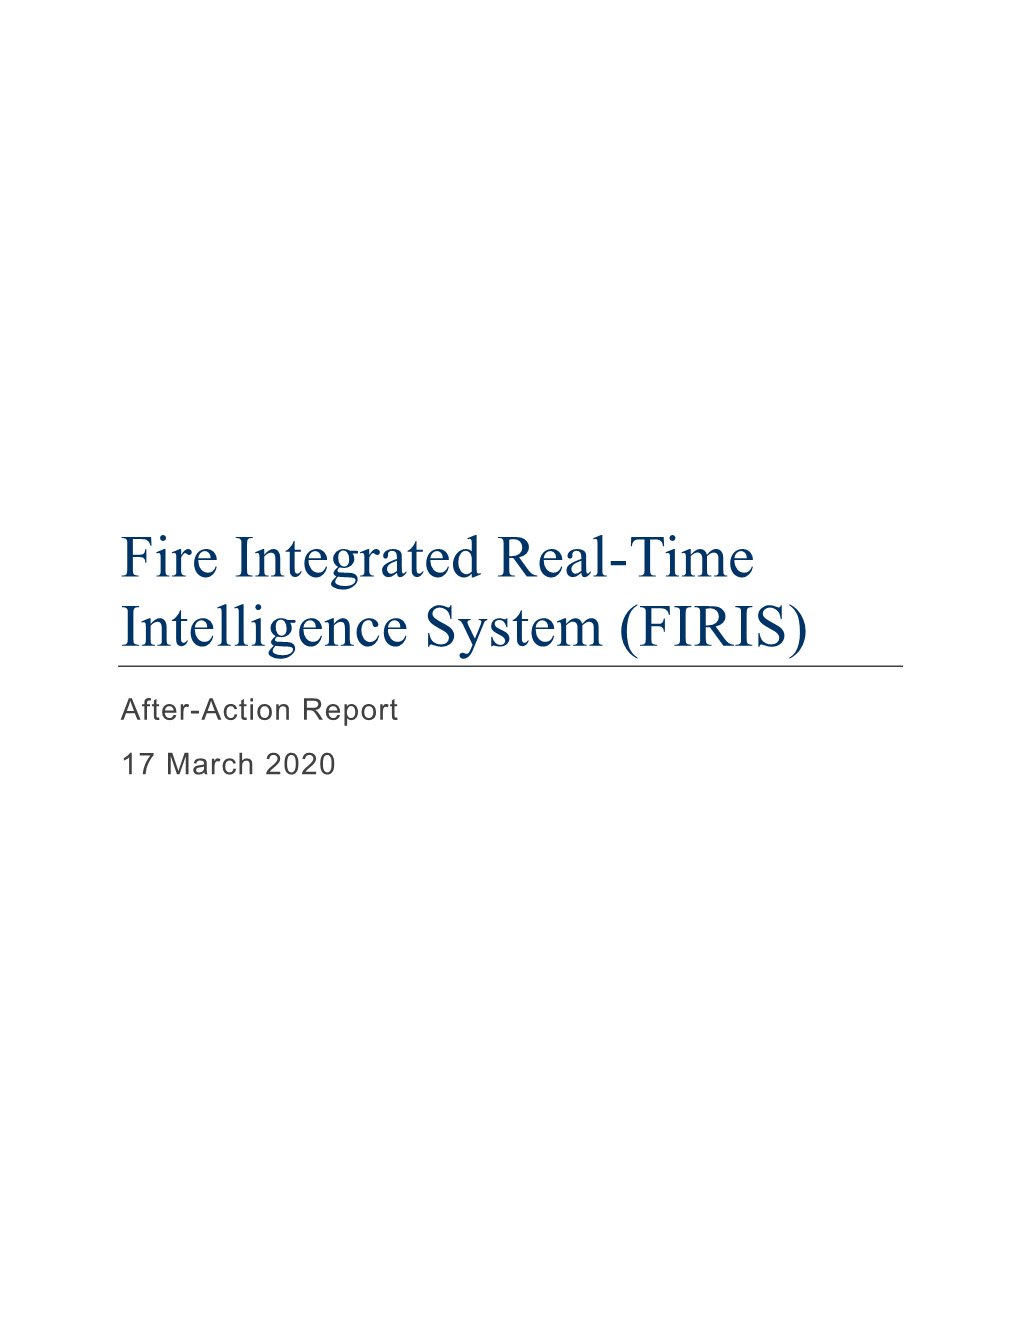 Fire Integrated Real-Time Intelligence System (FIRIS)